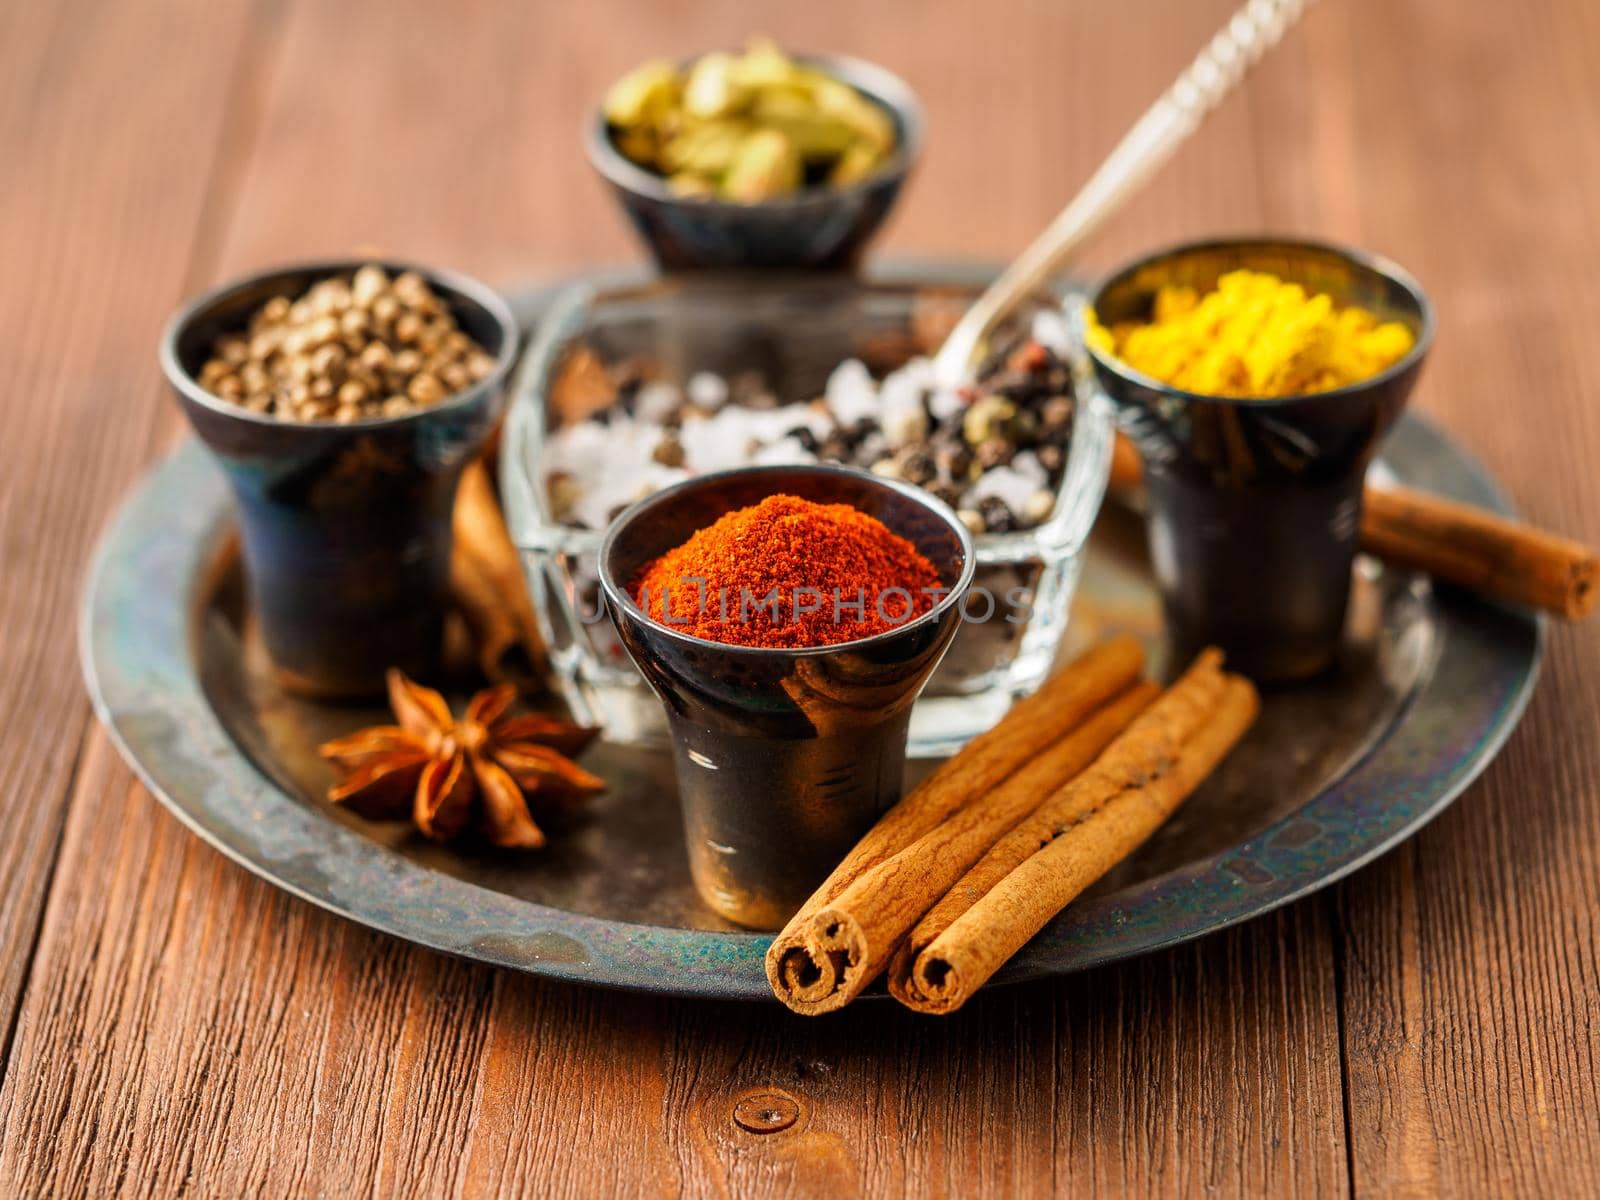 Oriental spice set - coriander, red pepper, turmeric, cinnamon, star anise, rosemary various seasonings in metall cups, on brown wooden table, side view, mcro, selective focus. by NataBene